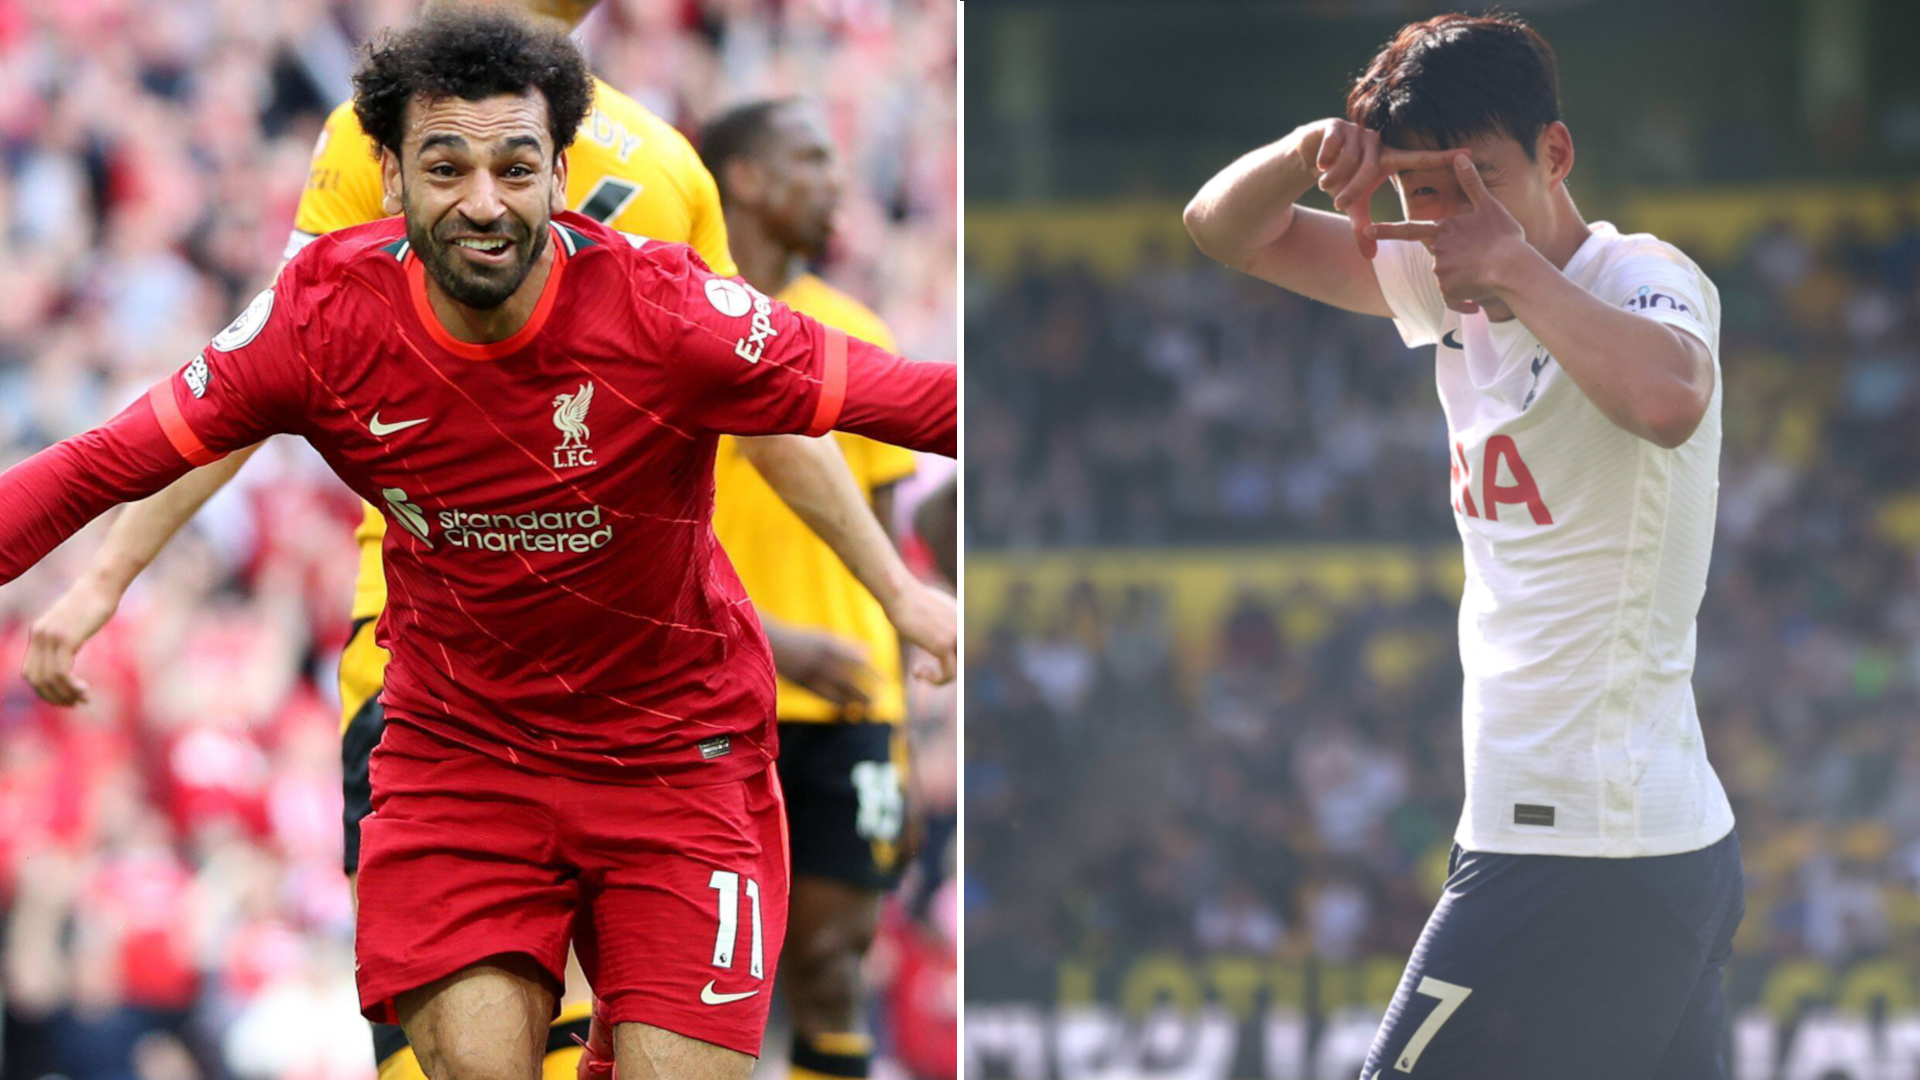 
                <strong>Premier League: Mohamed Salah (FC Liverpool) und Heung-min Son (Tottenham Hotspur)</strong><br>
                Platz 1: Mohamed Salah und Heung-min Son je 23 Tore - Platz 2: Cristiano Ronaldo (Manchester United), 18 Tore - Platz 3: Harry Kane (Tottenham Hotspur), 17 Tore
              